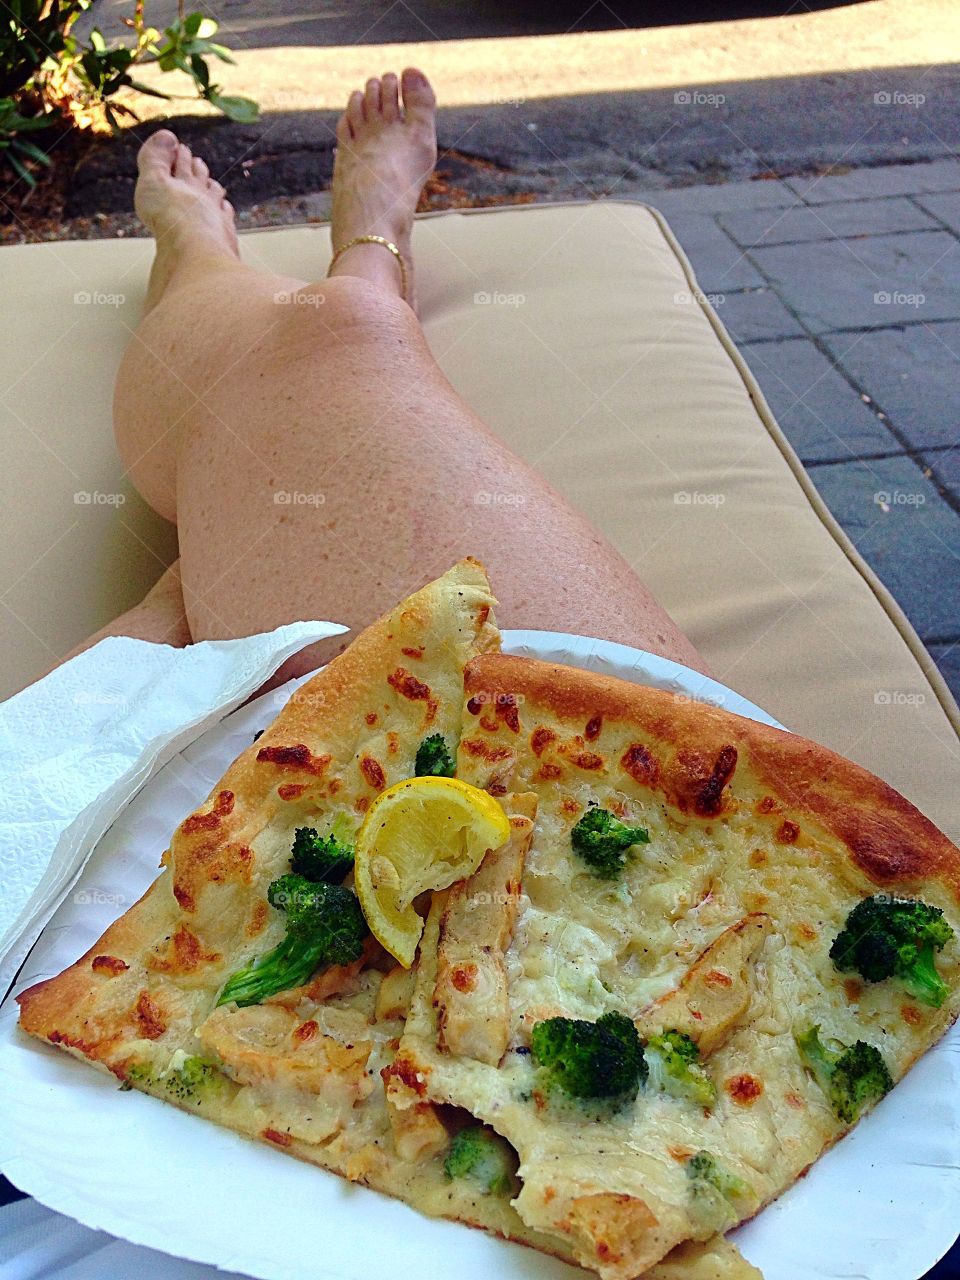 Lunchtime . Pizza on the patio 